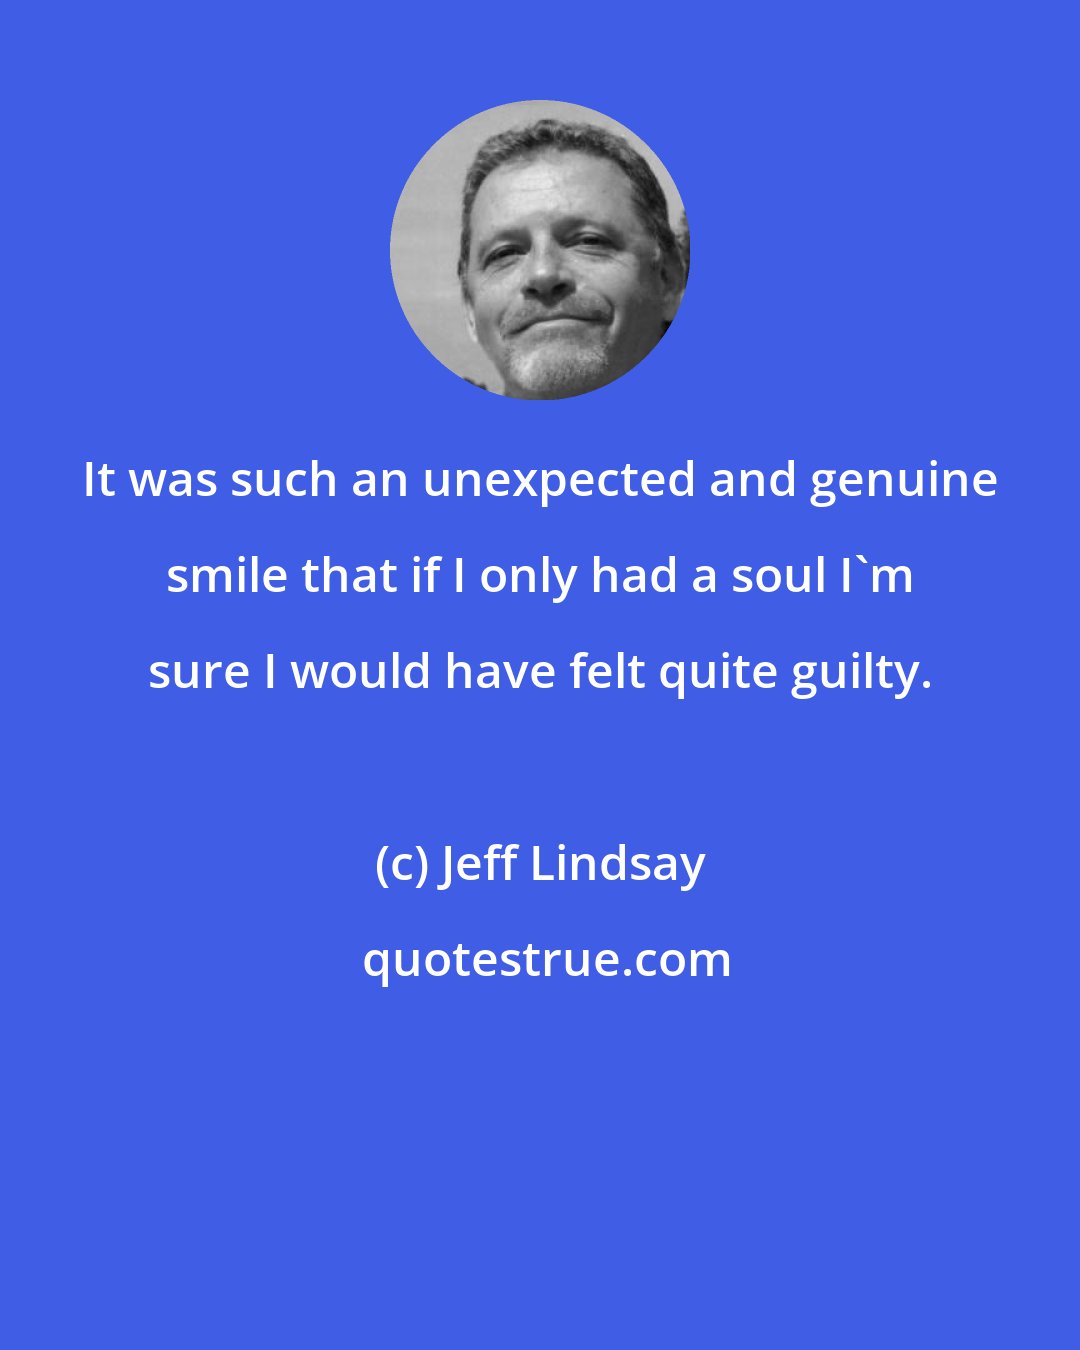 Jeff Lindsay: It was such an unexpected and genuine smile that if I only had a soul I'm sure I would have felt quite guilty.